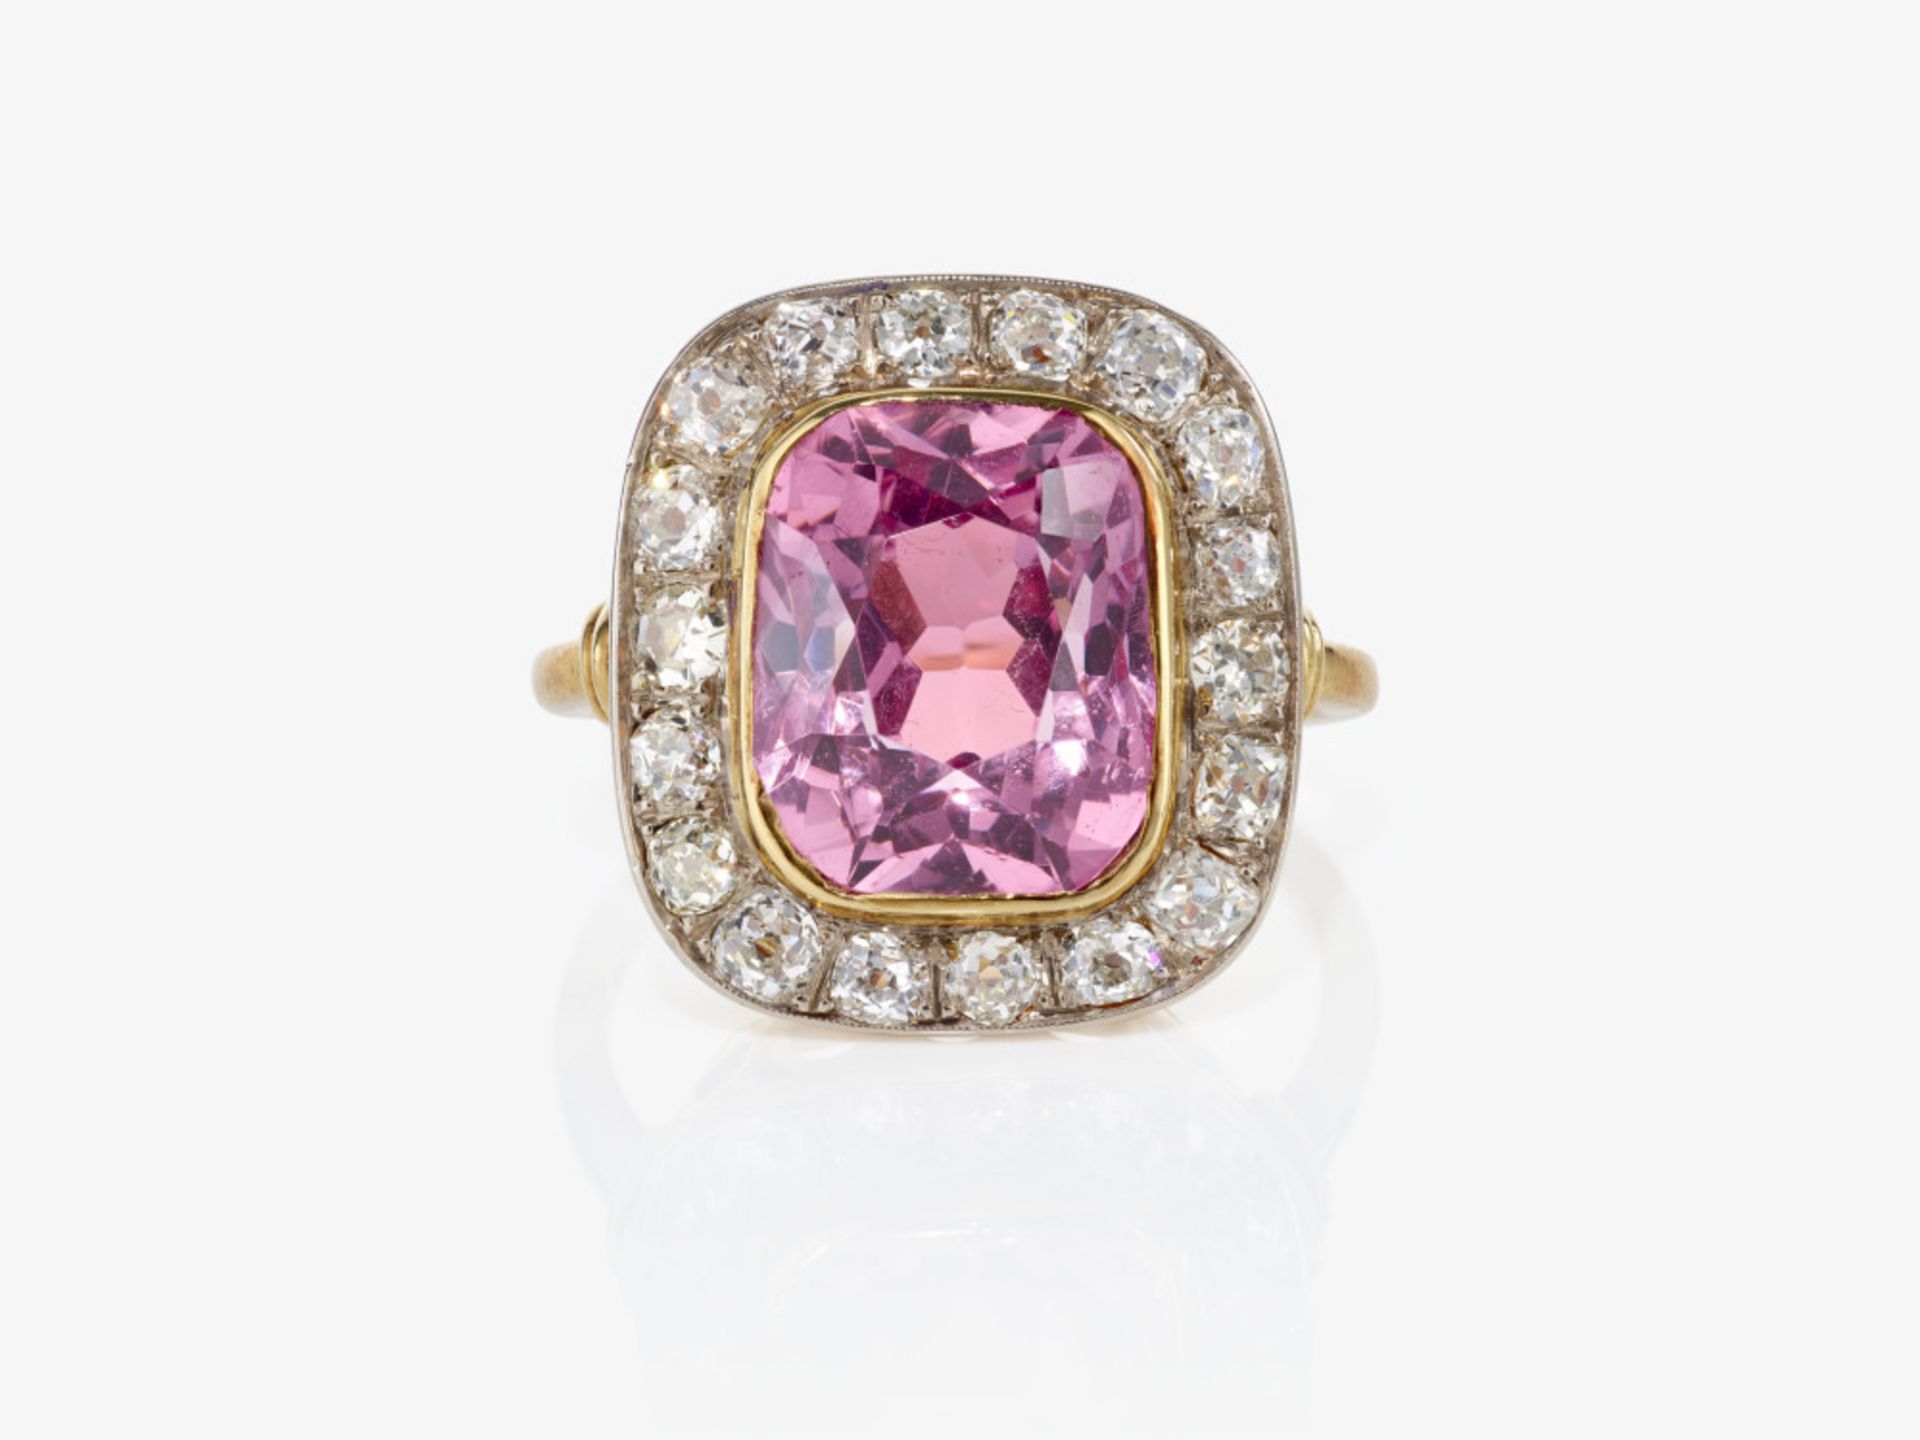 An entourage ring with a pink spinel and old European cut diamonds - Germany, 1950s - Image 2 of 2